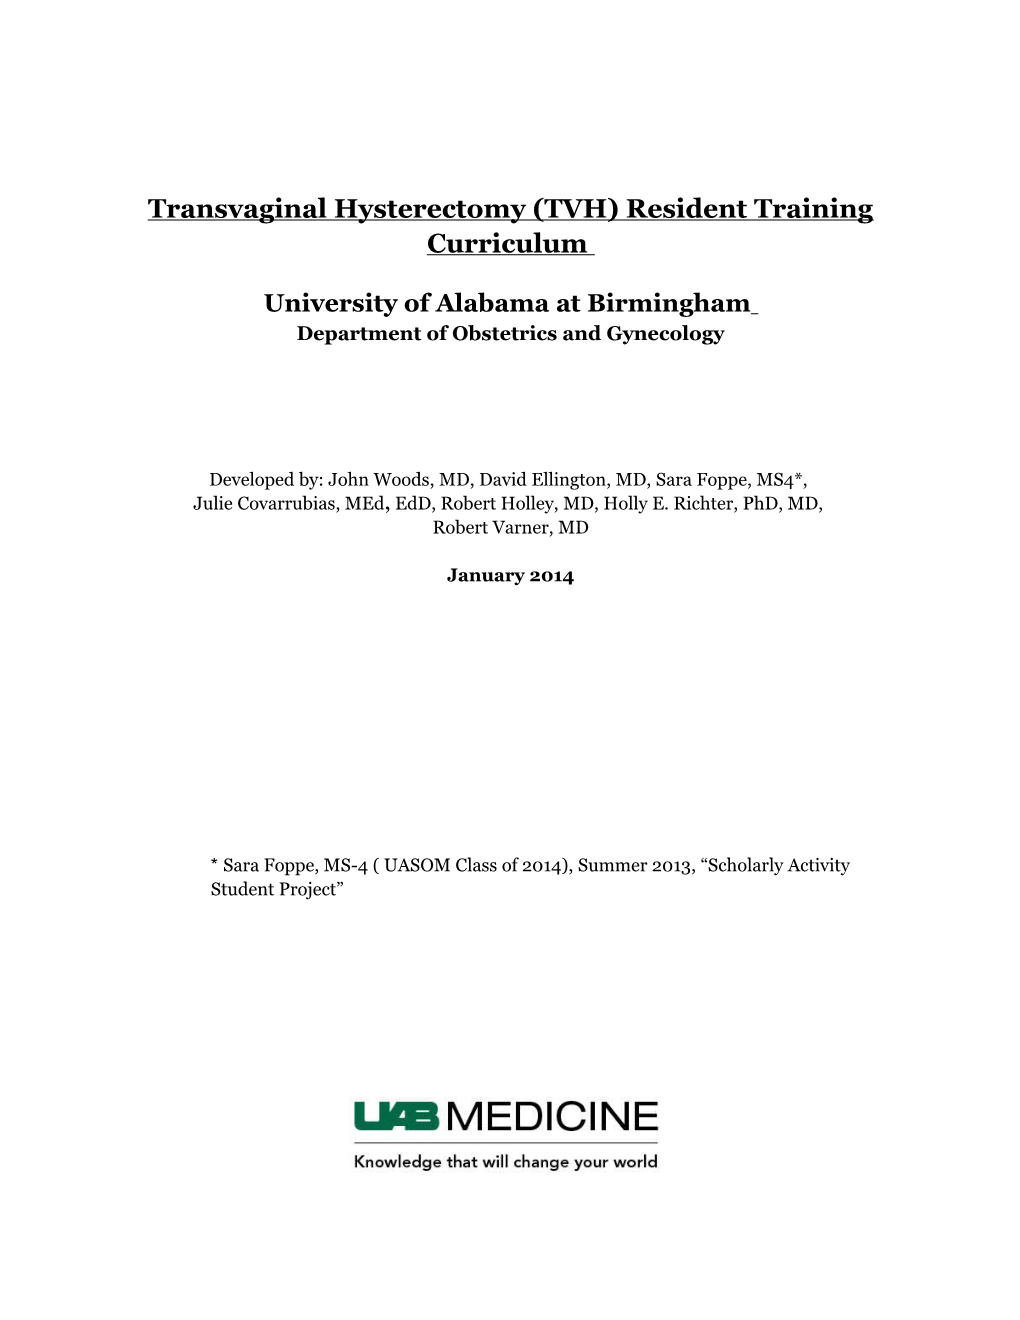 Transvaginal Hysterectomy (TVH) Resident Training Curriculum